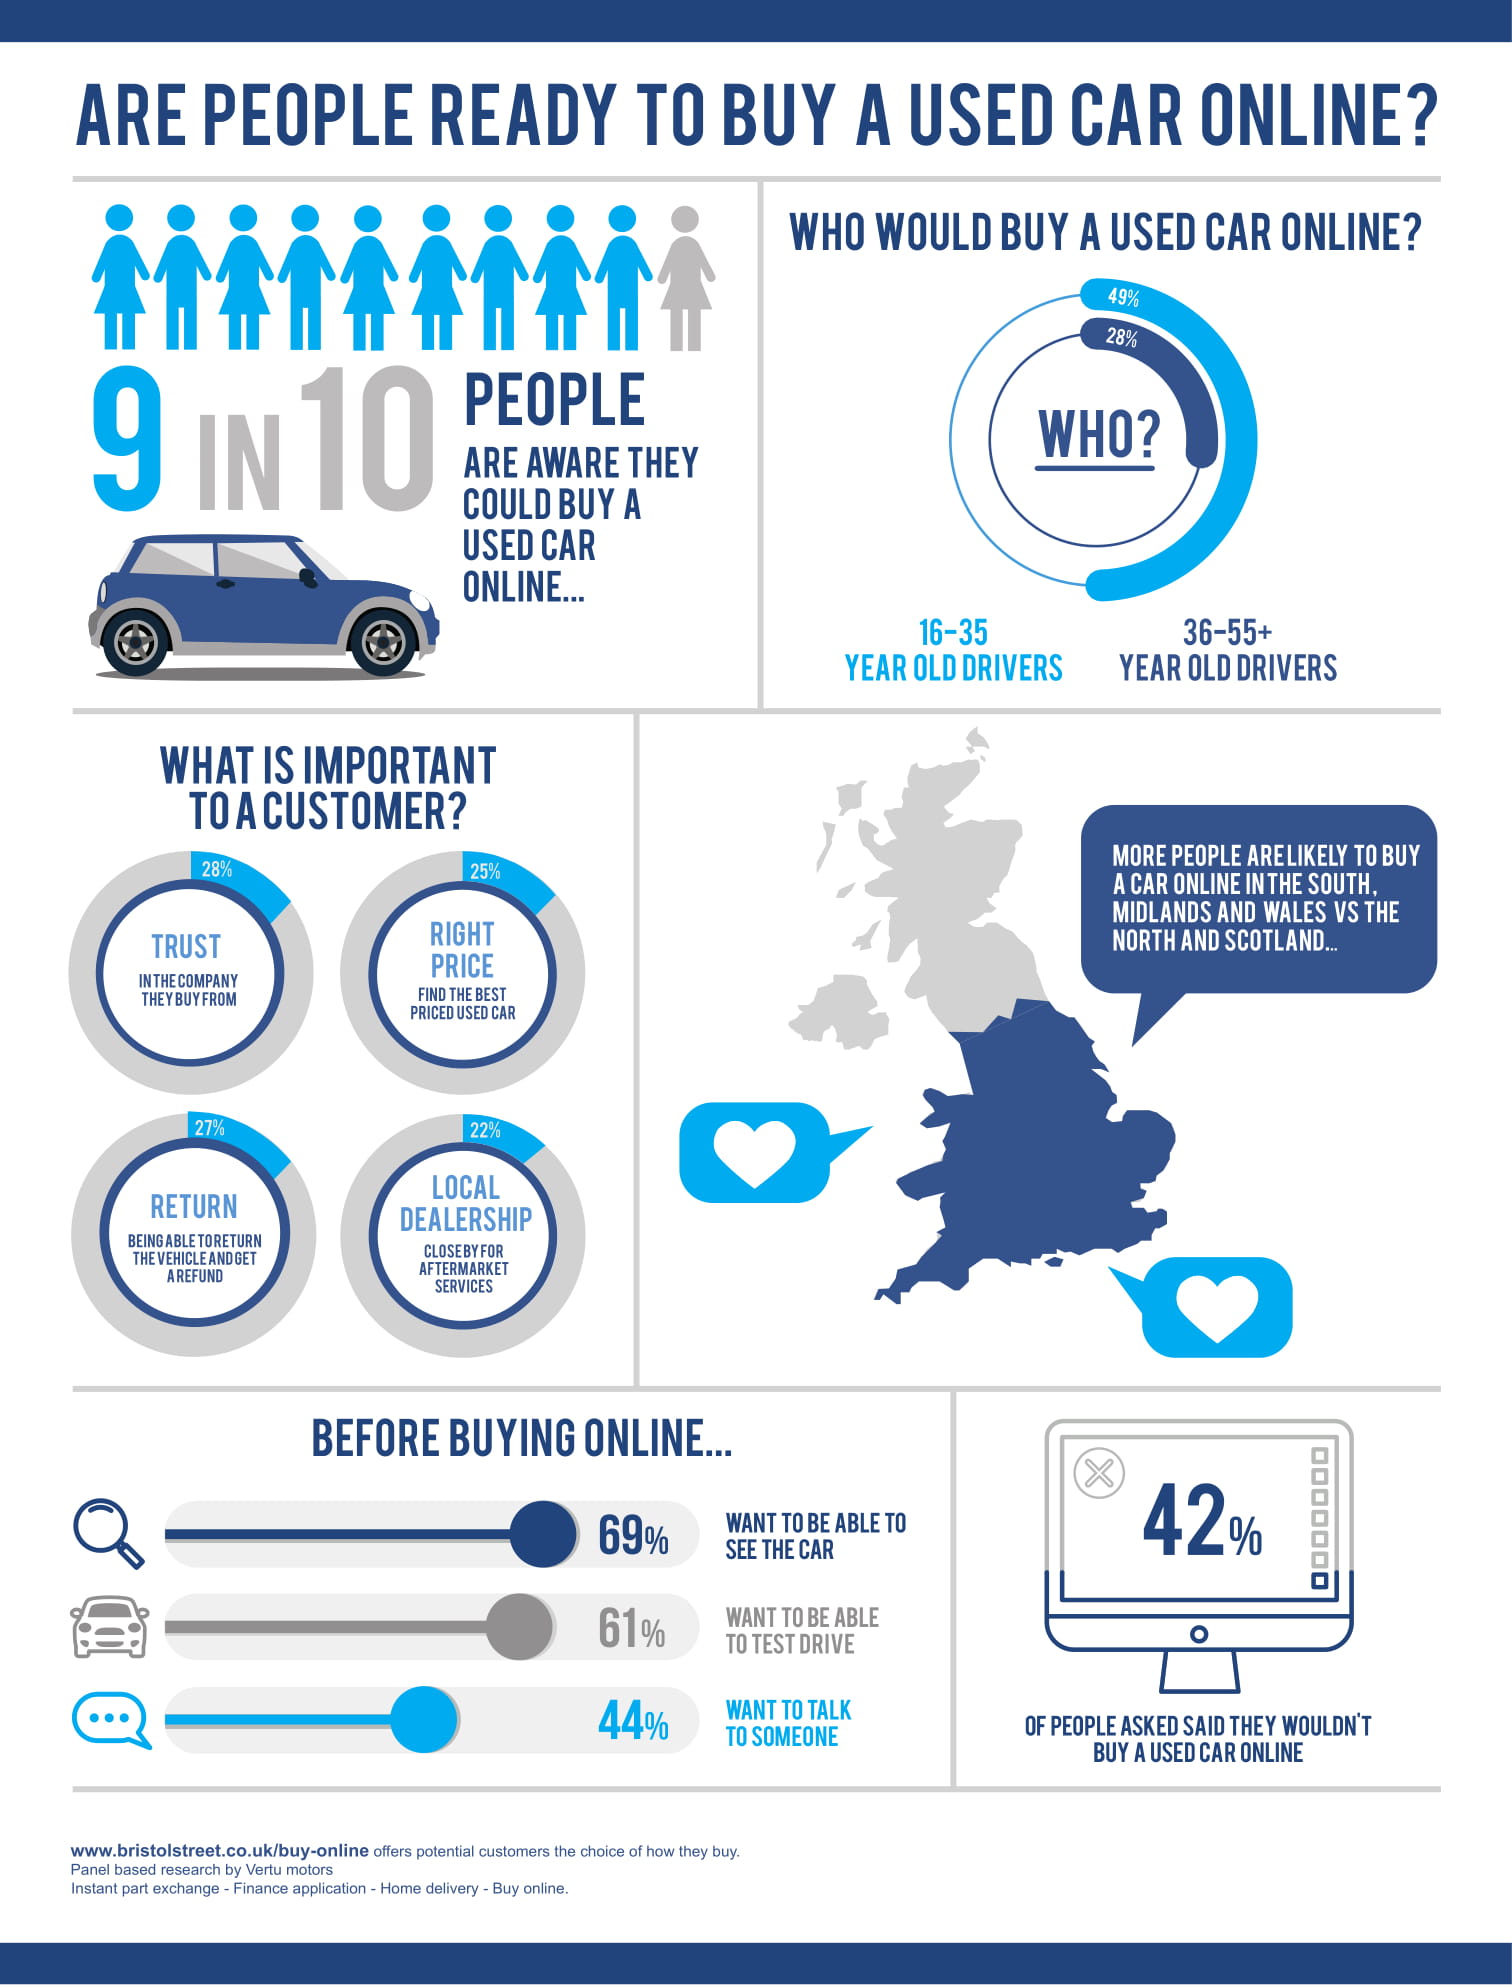 Ecommerce driving the used car industry for 16-35 year olds